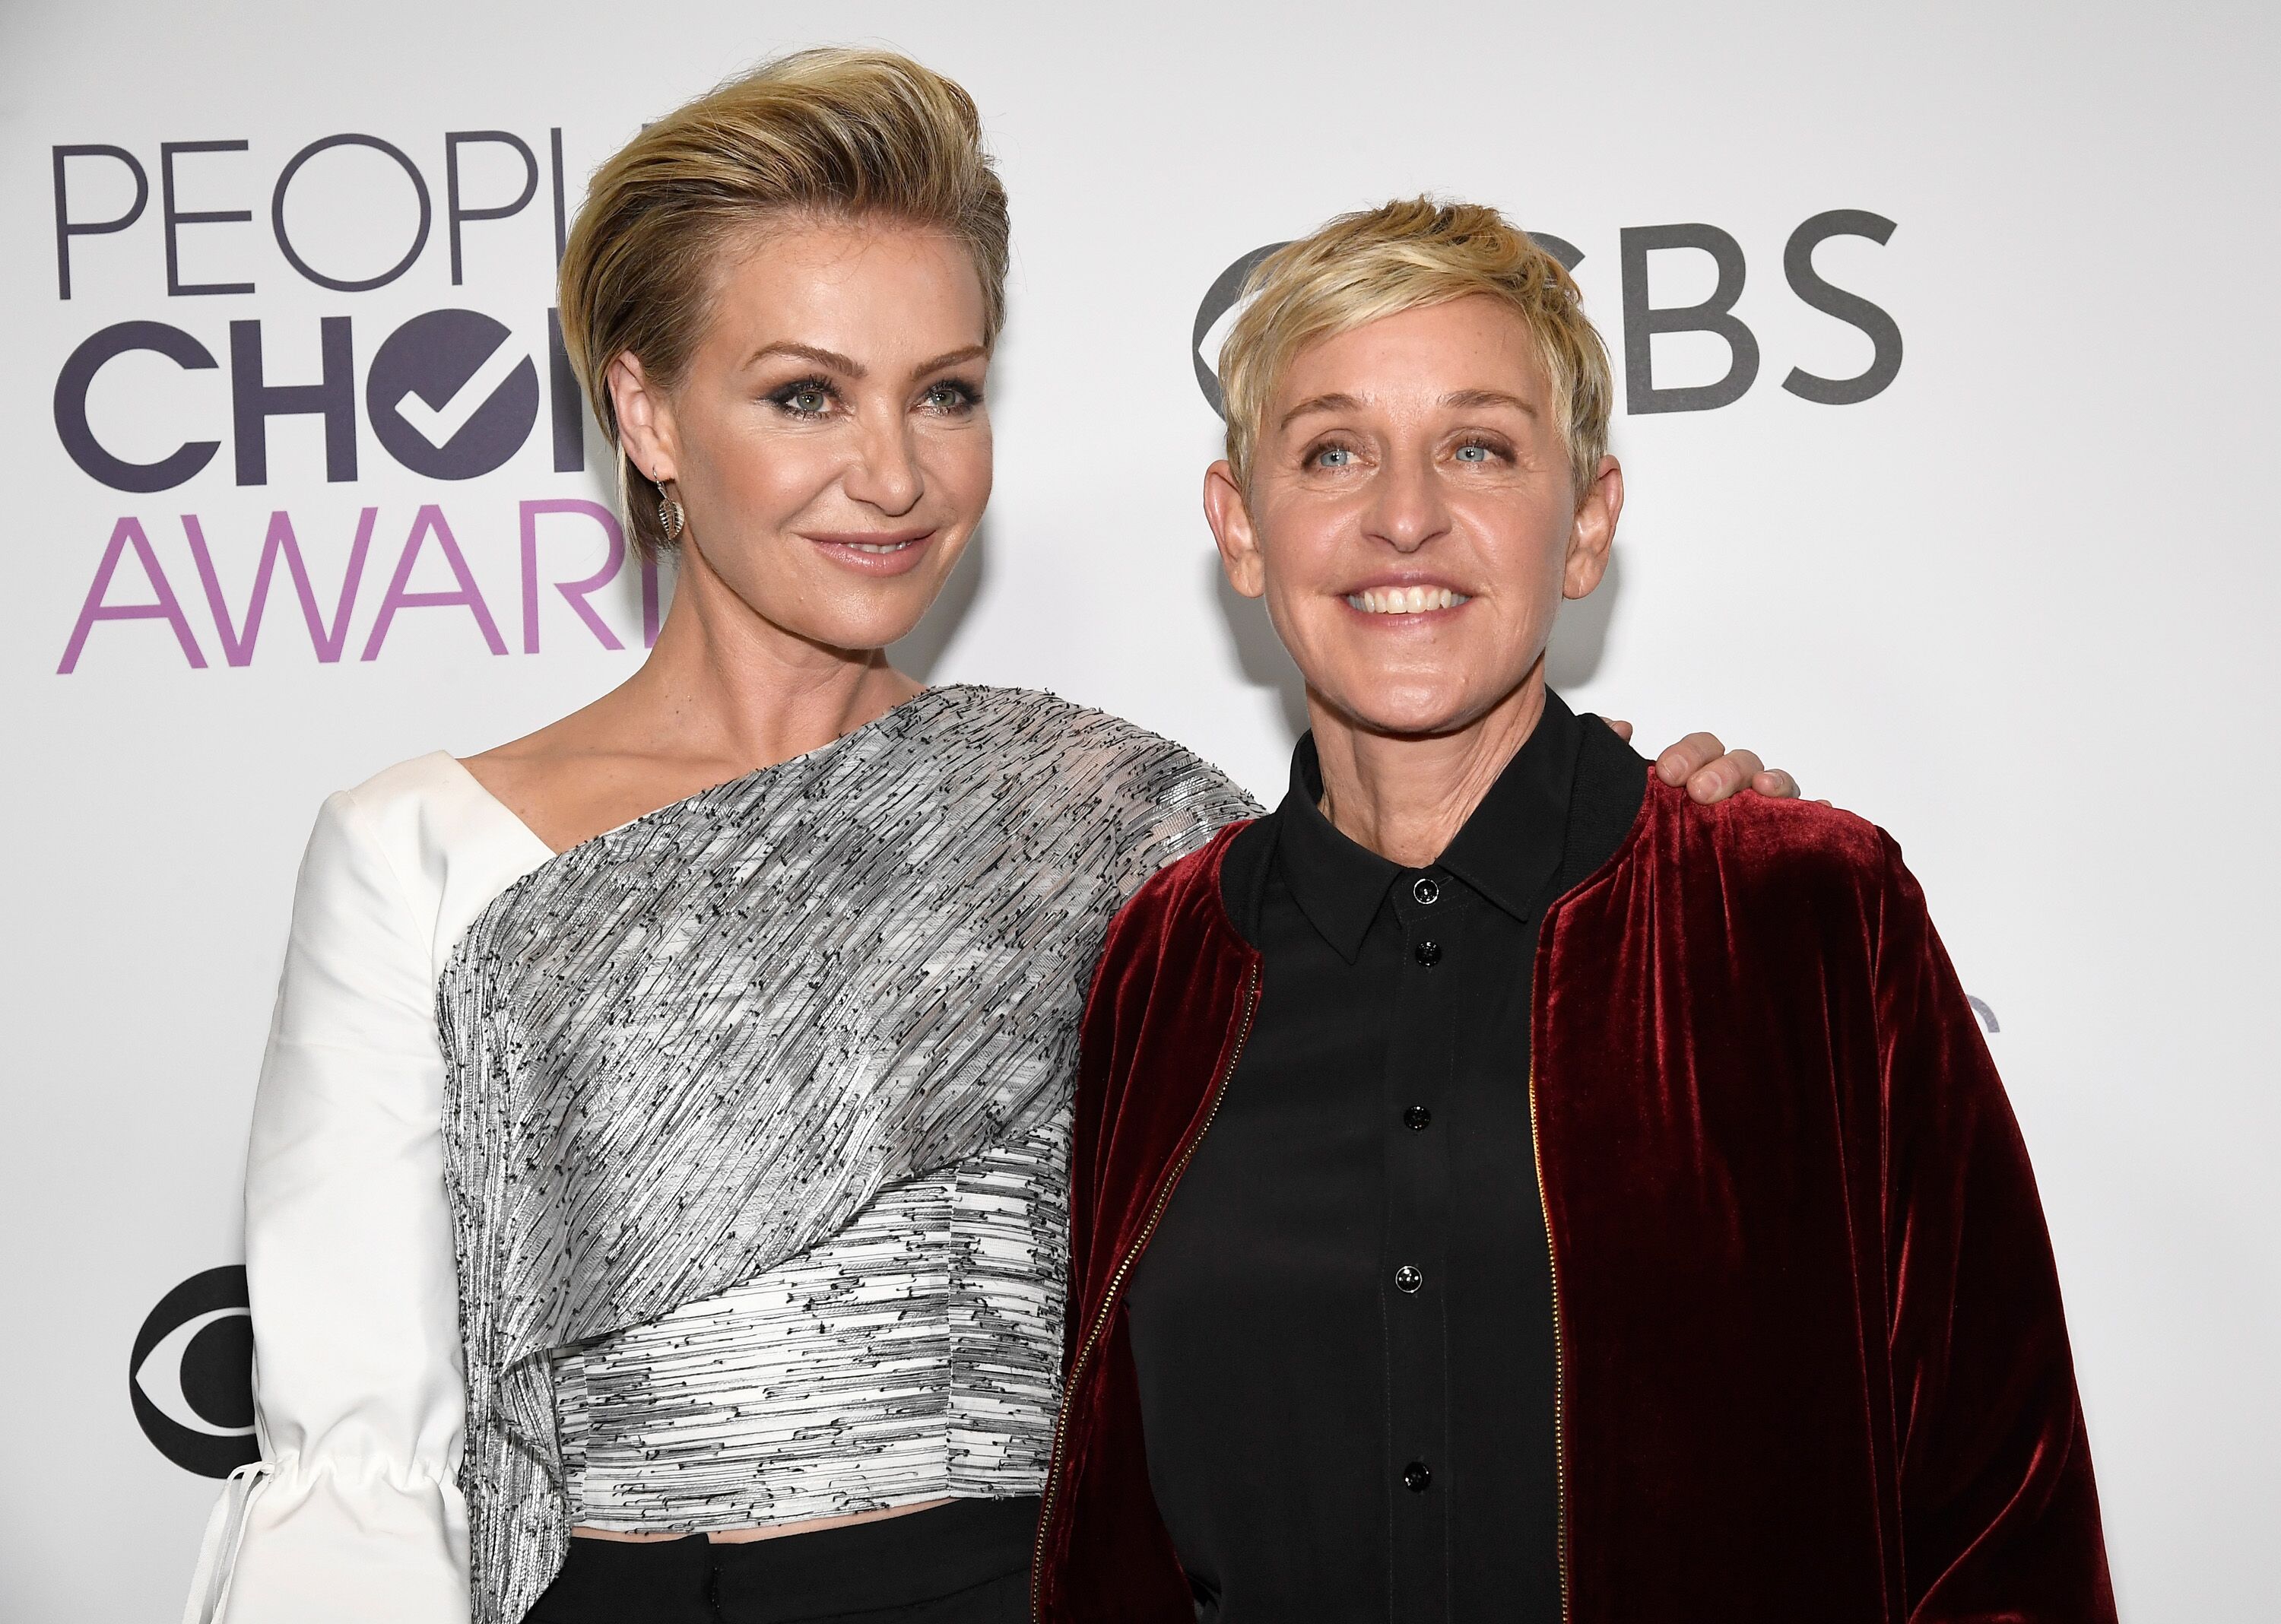 Ellen DeGeneres and wife Portia De Rossi at the People's Choice Awards on January 18, 2017, in Los Angeles, California | Photo: Kevork Djansezian/Getty Images